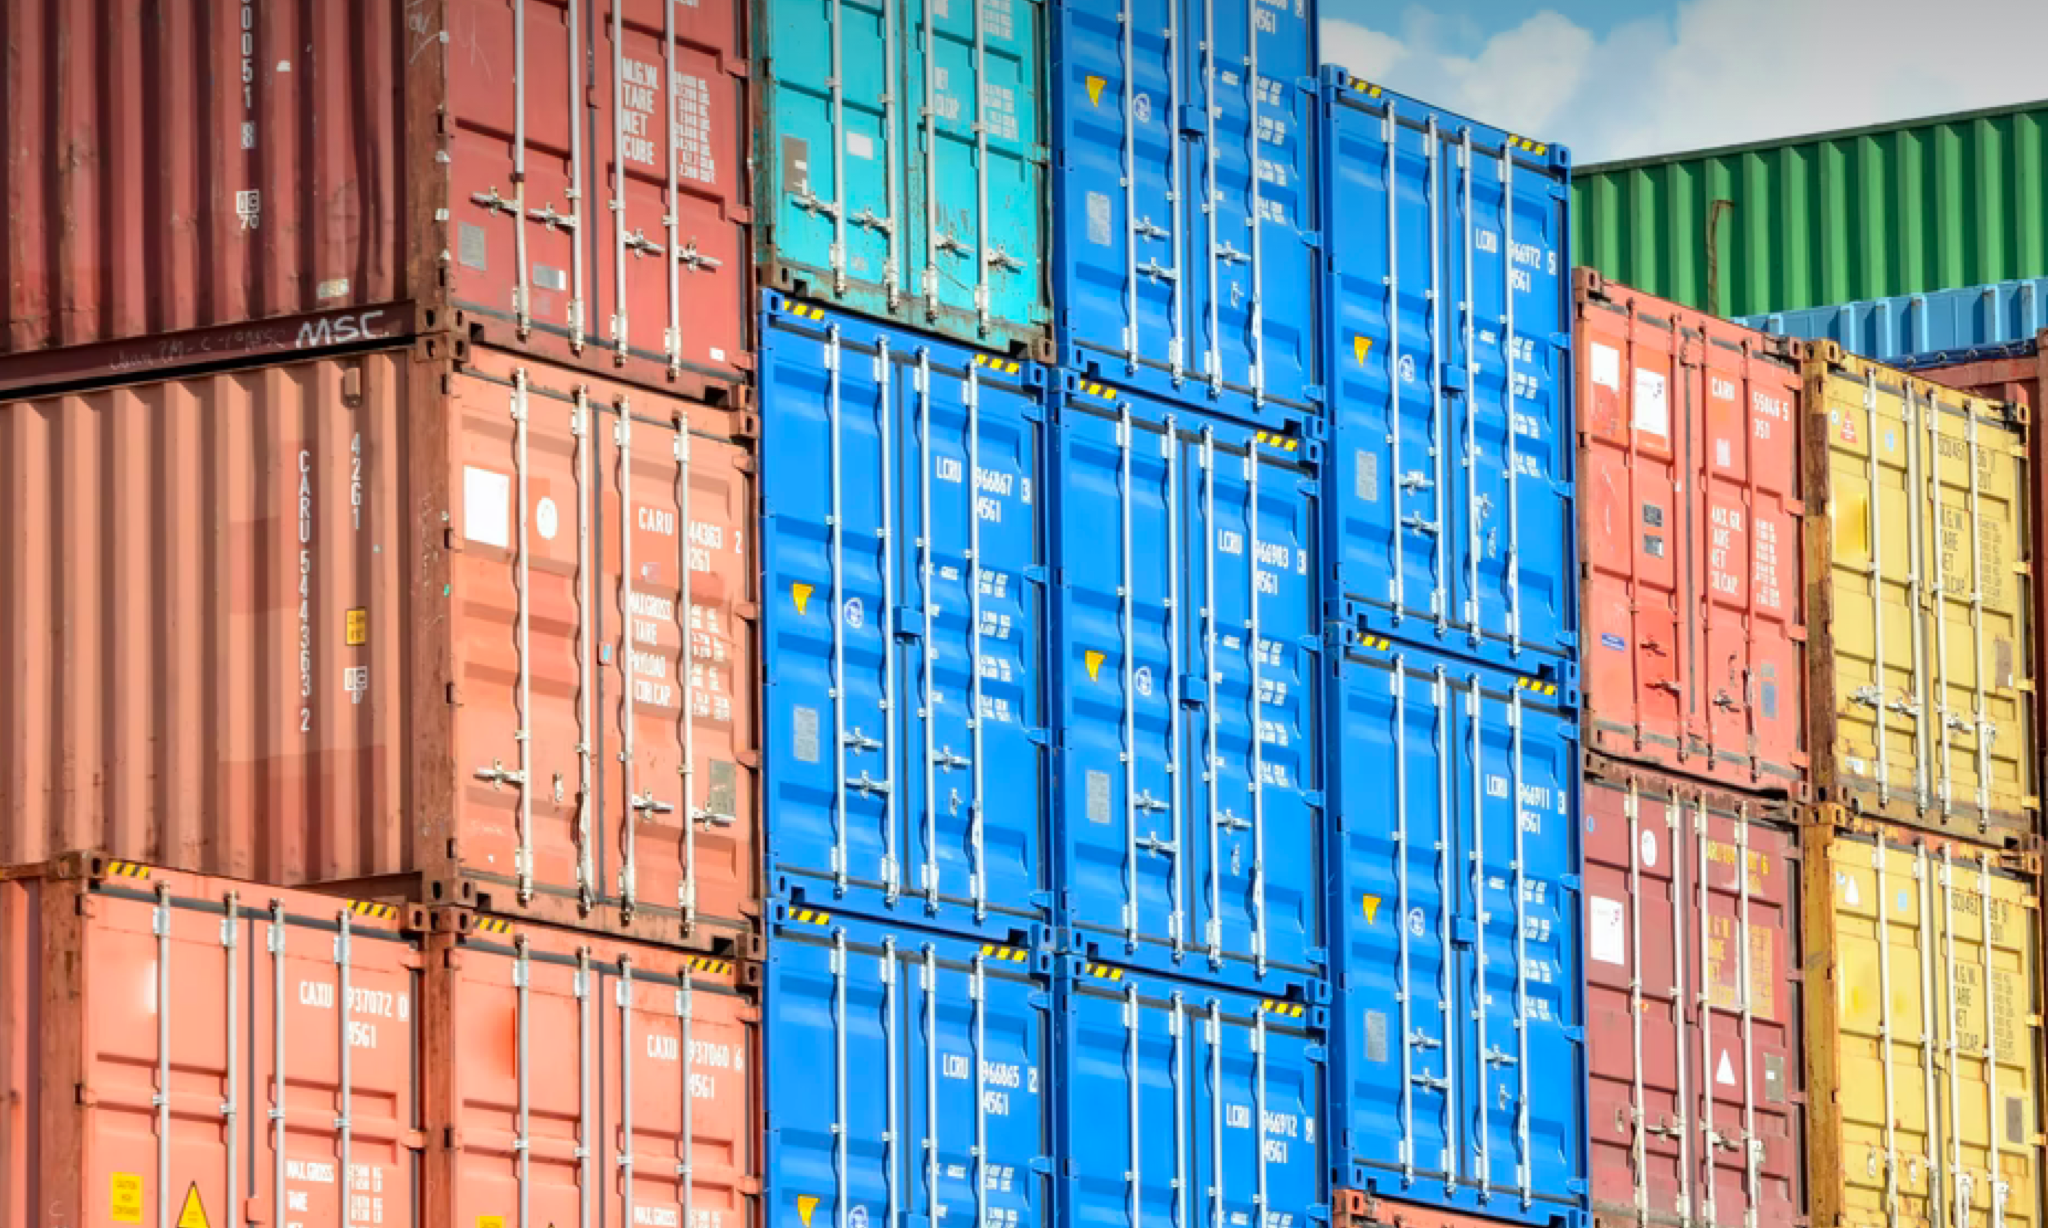 Shipping containers stacked at a port.